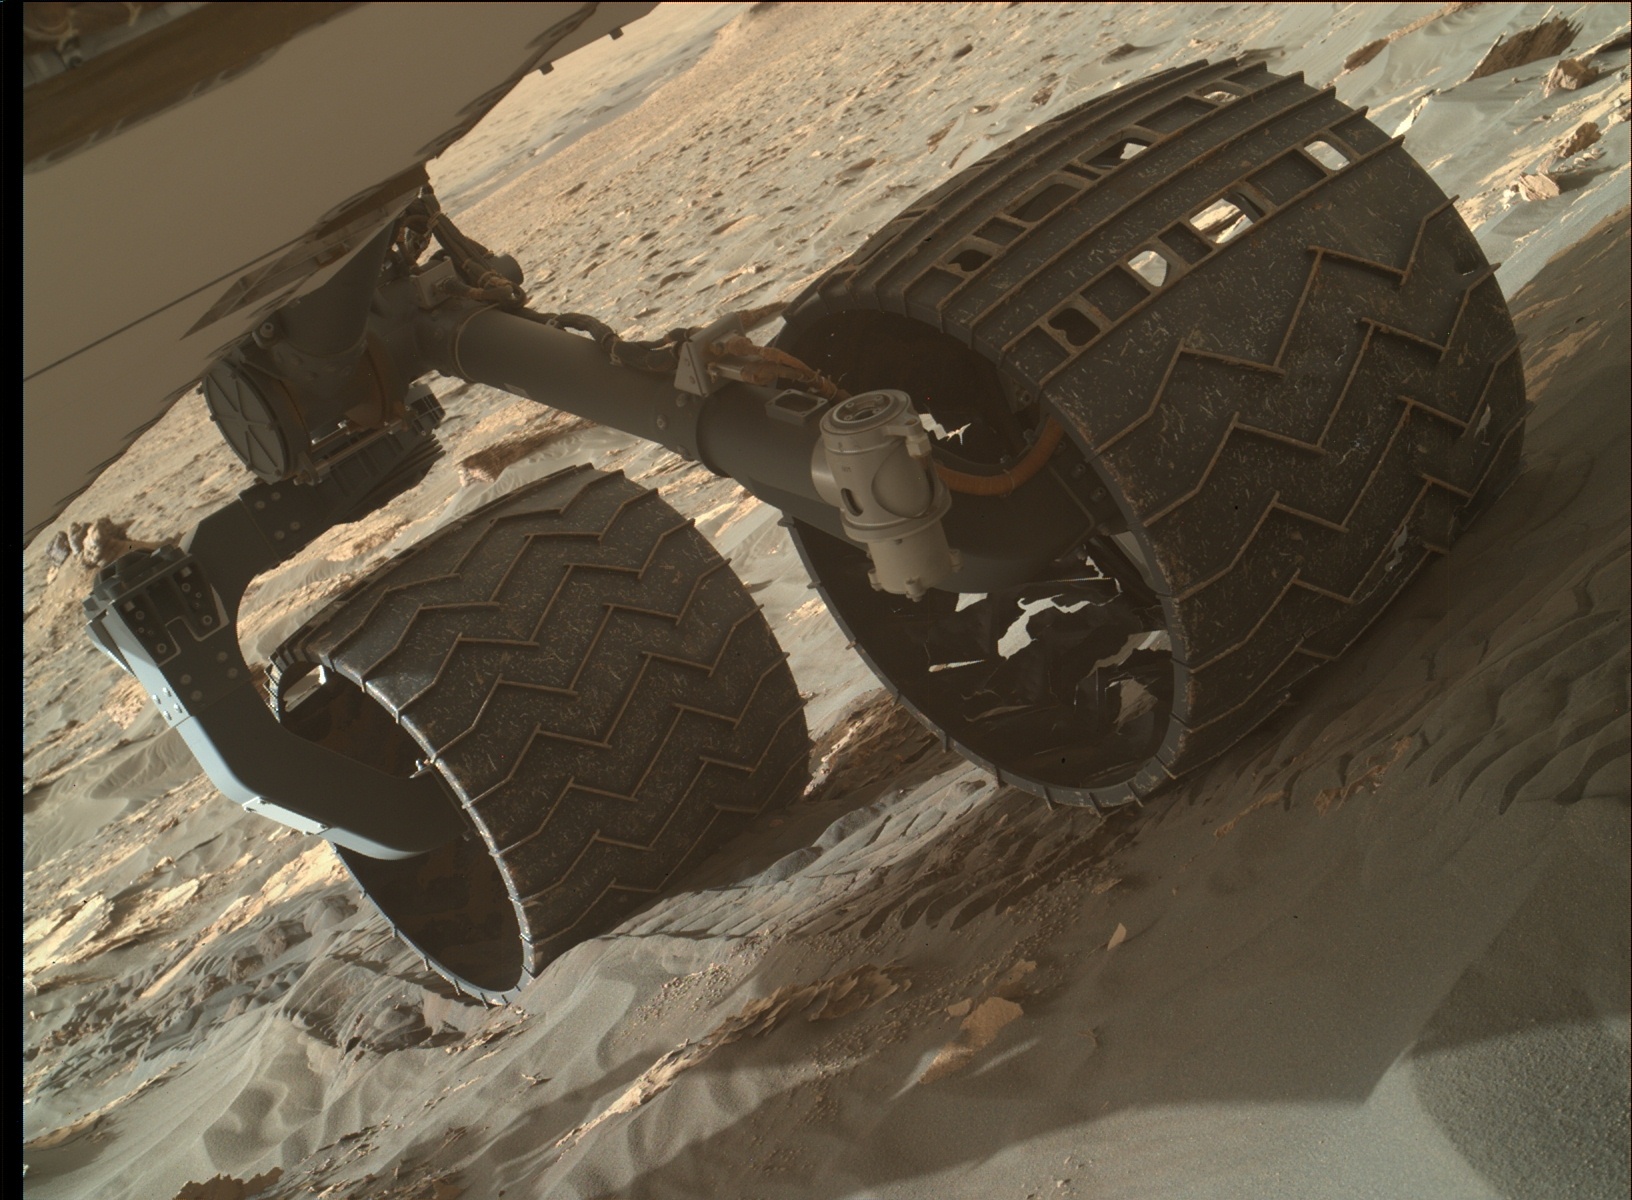 Nasa's Mars rover Curiosity acquired this image using its Mars Hand Lens Imager (MAHLI) on Sol 1798